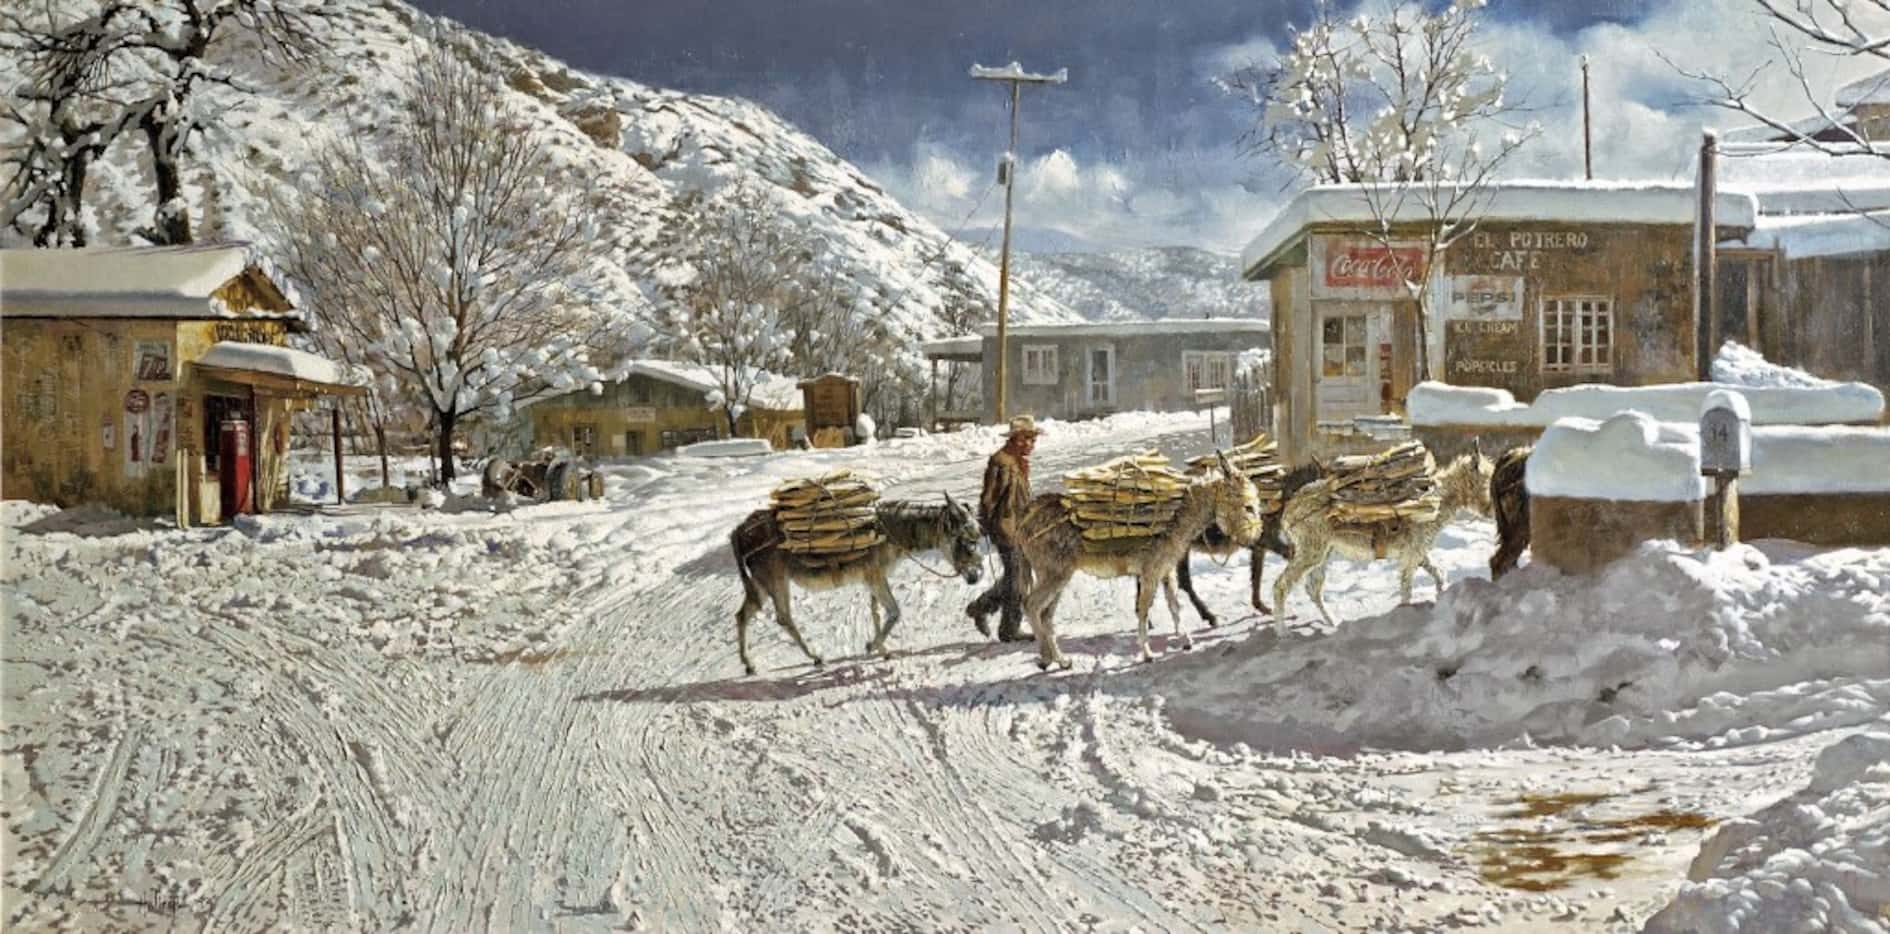 Clark Hulings, Woodbearers of Chimayo, oil on Canvas, 30 x 60", New Mexico, 1974